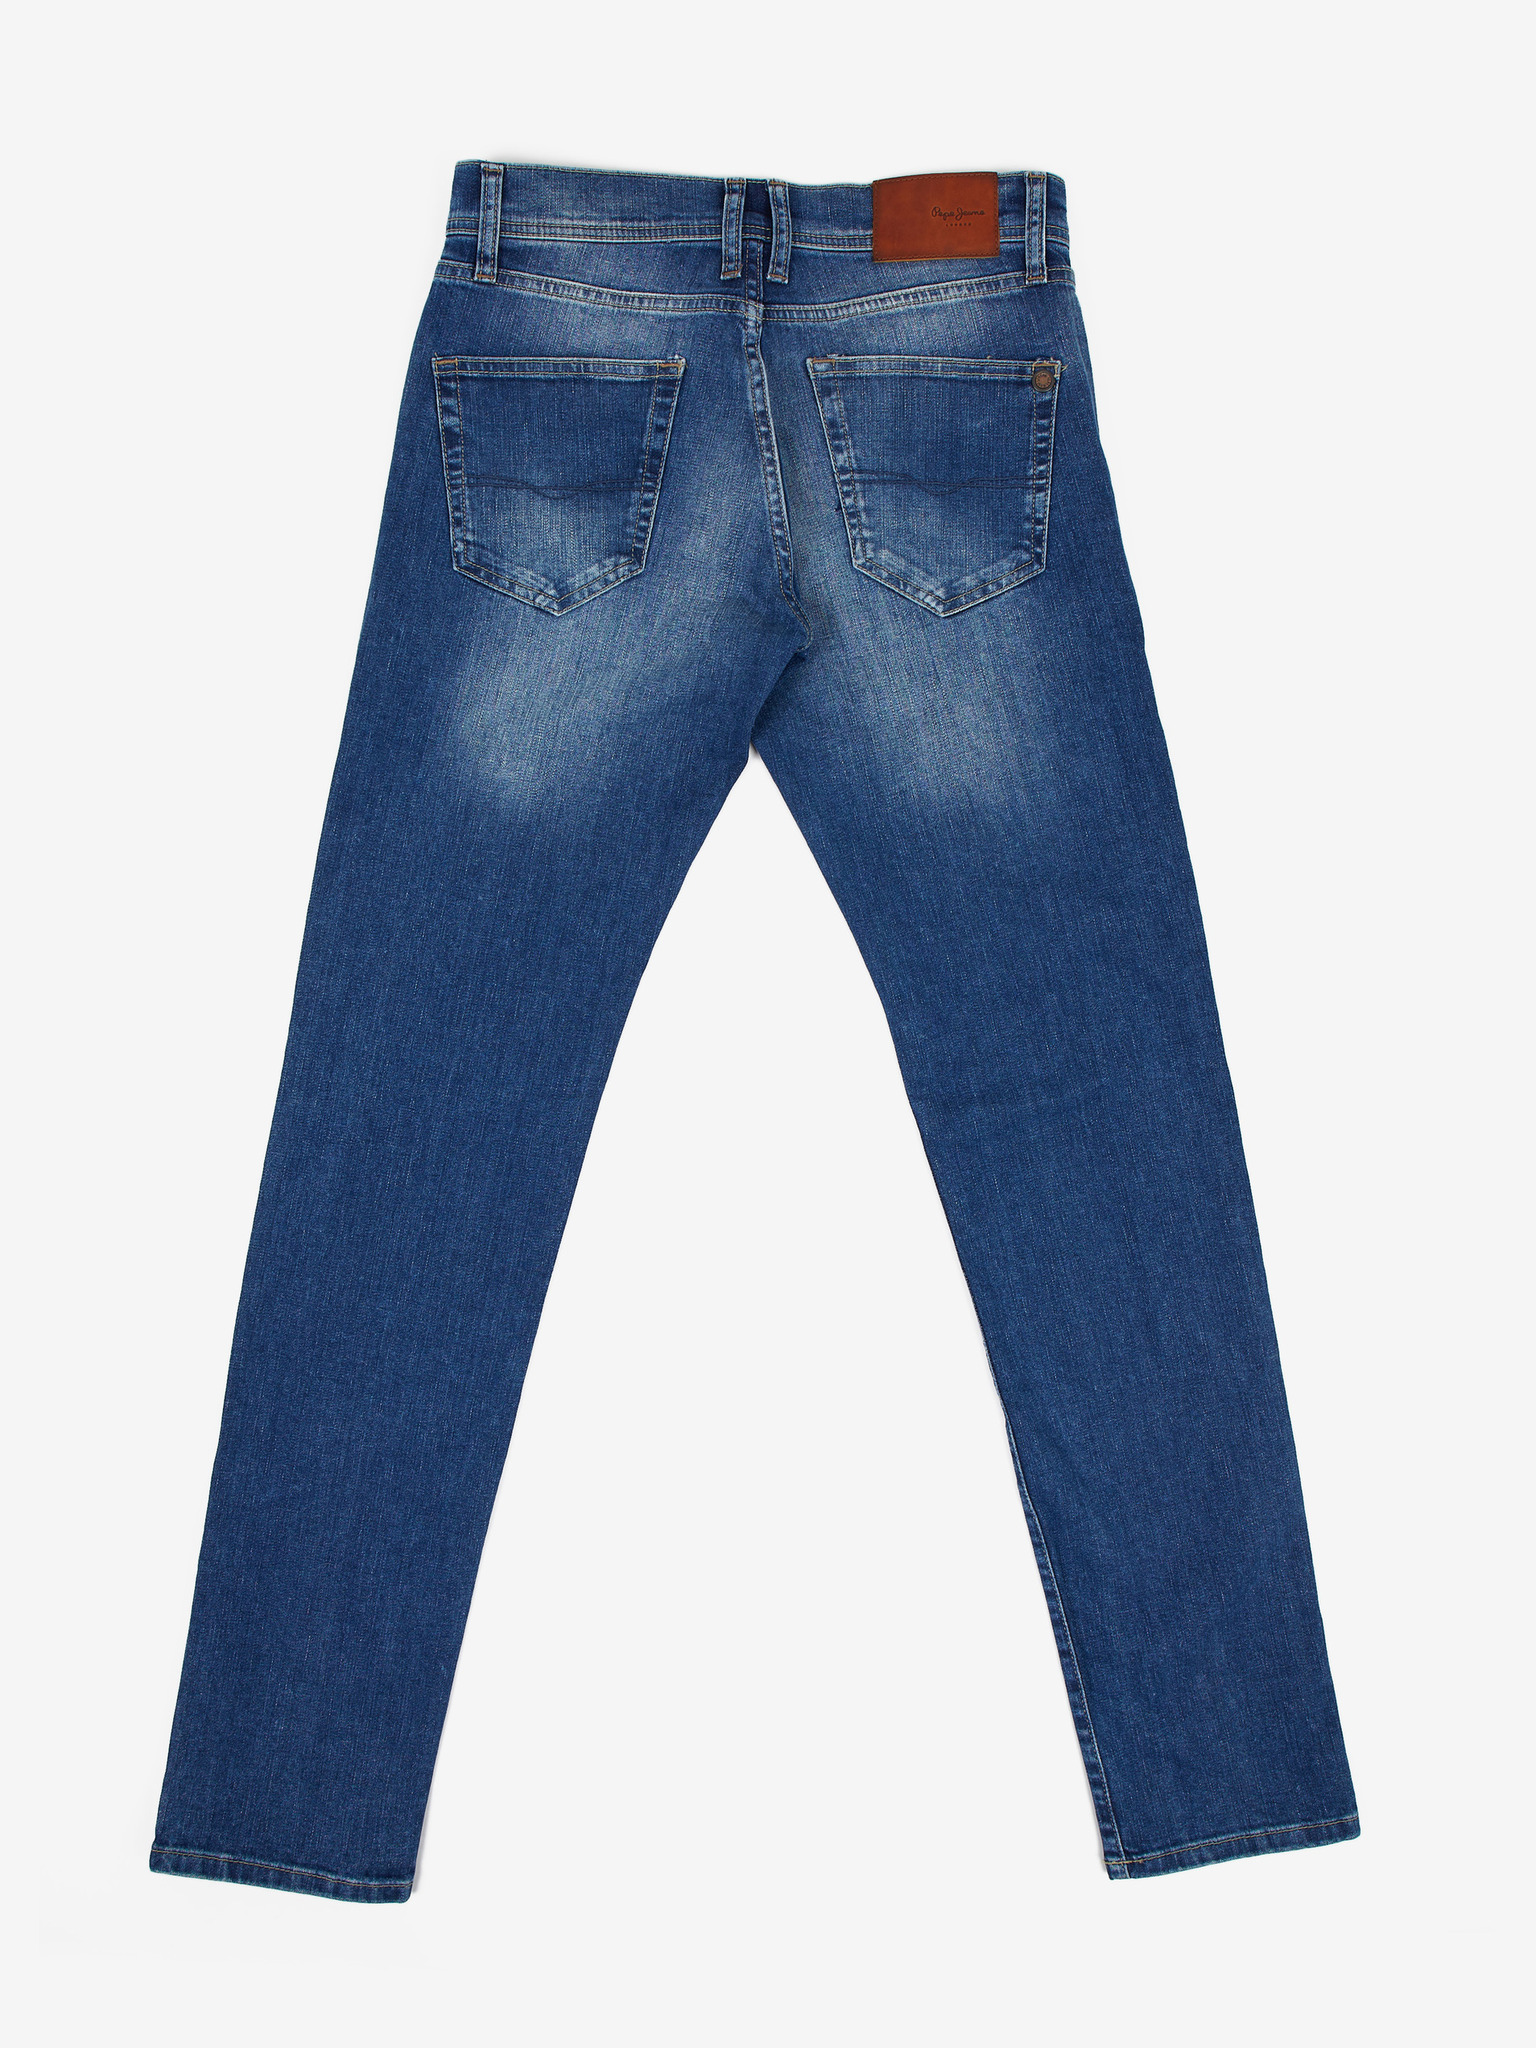 - Pepe Jeans Cane Jeans